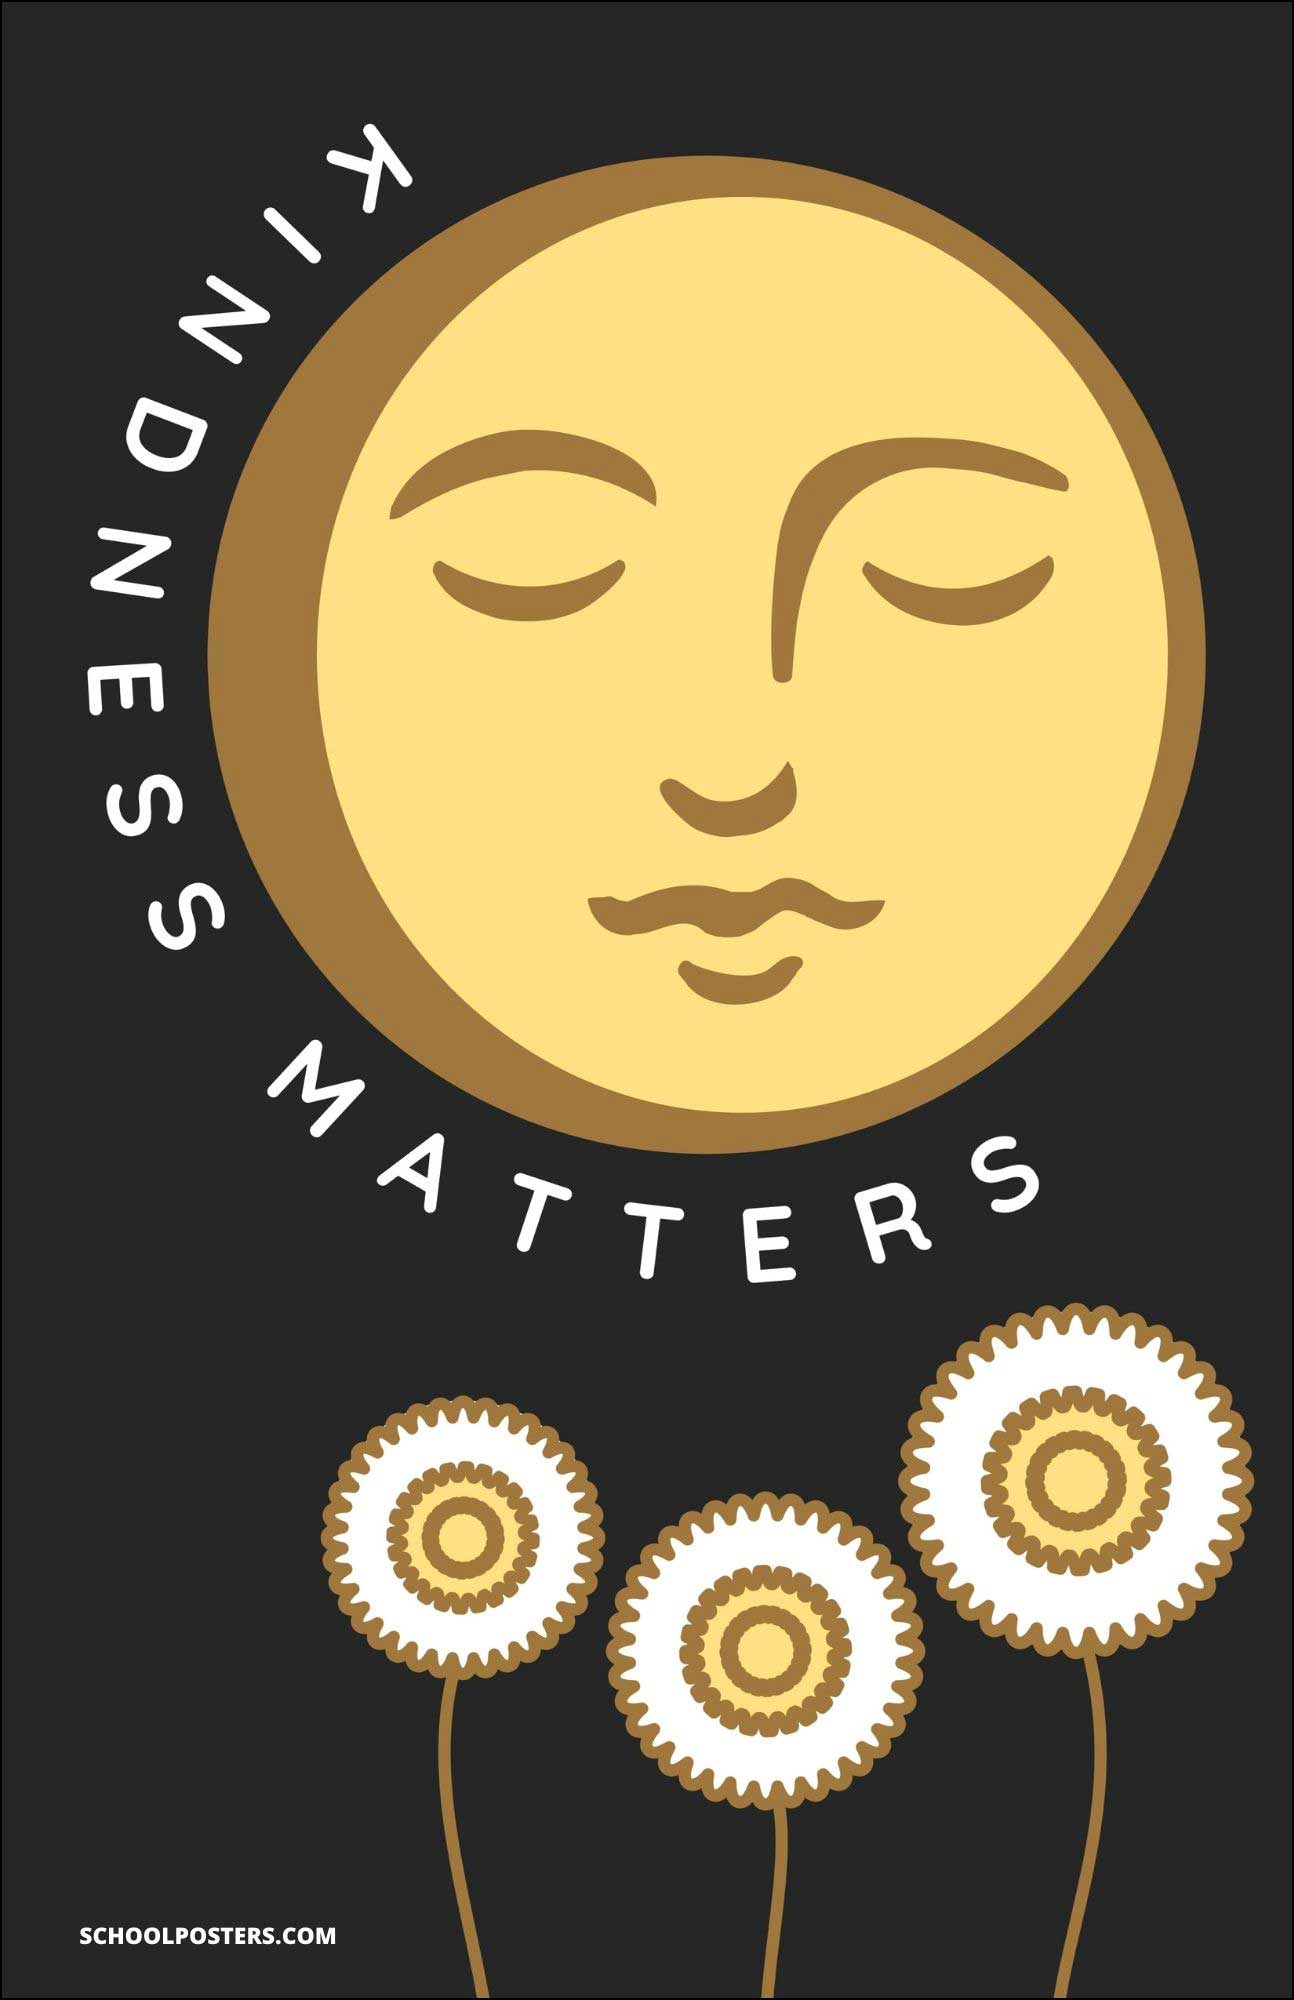 Kindness Matters Poster